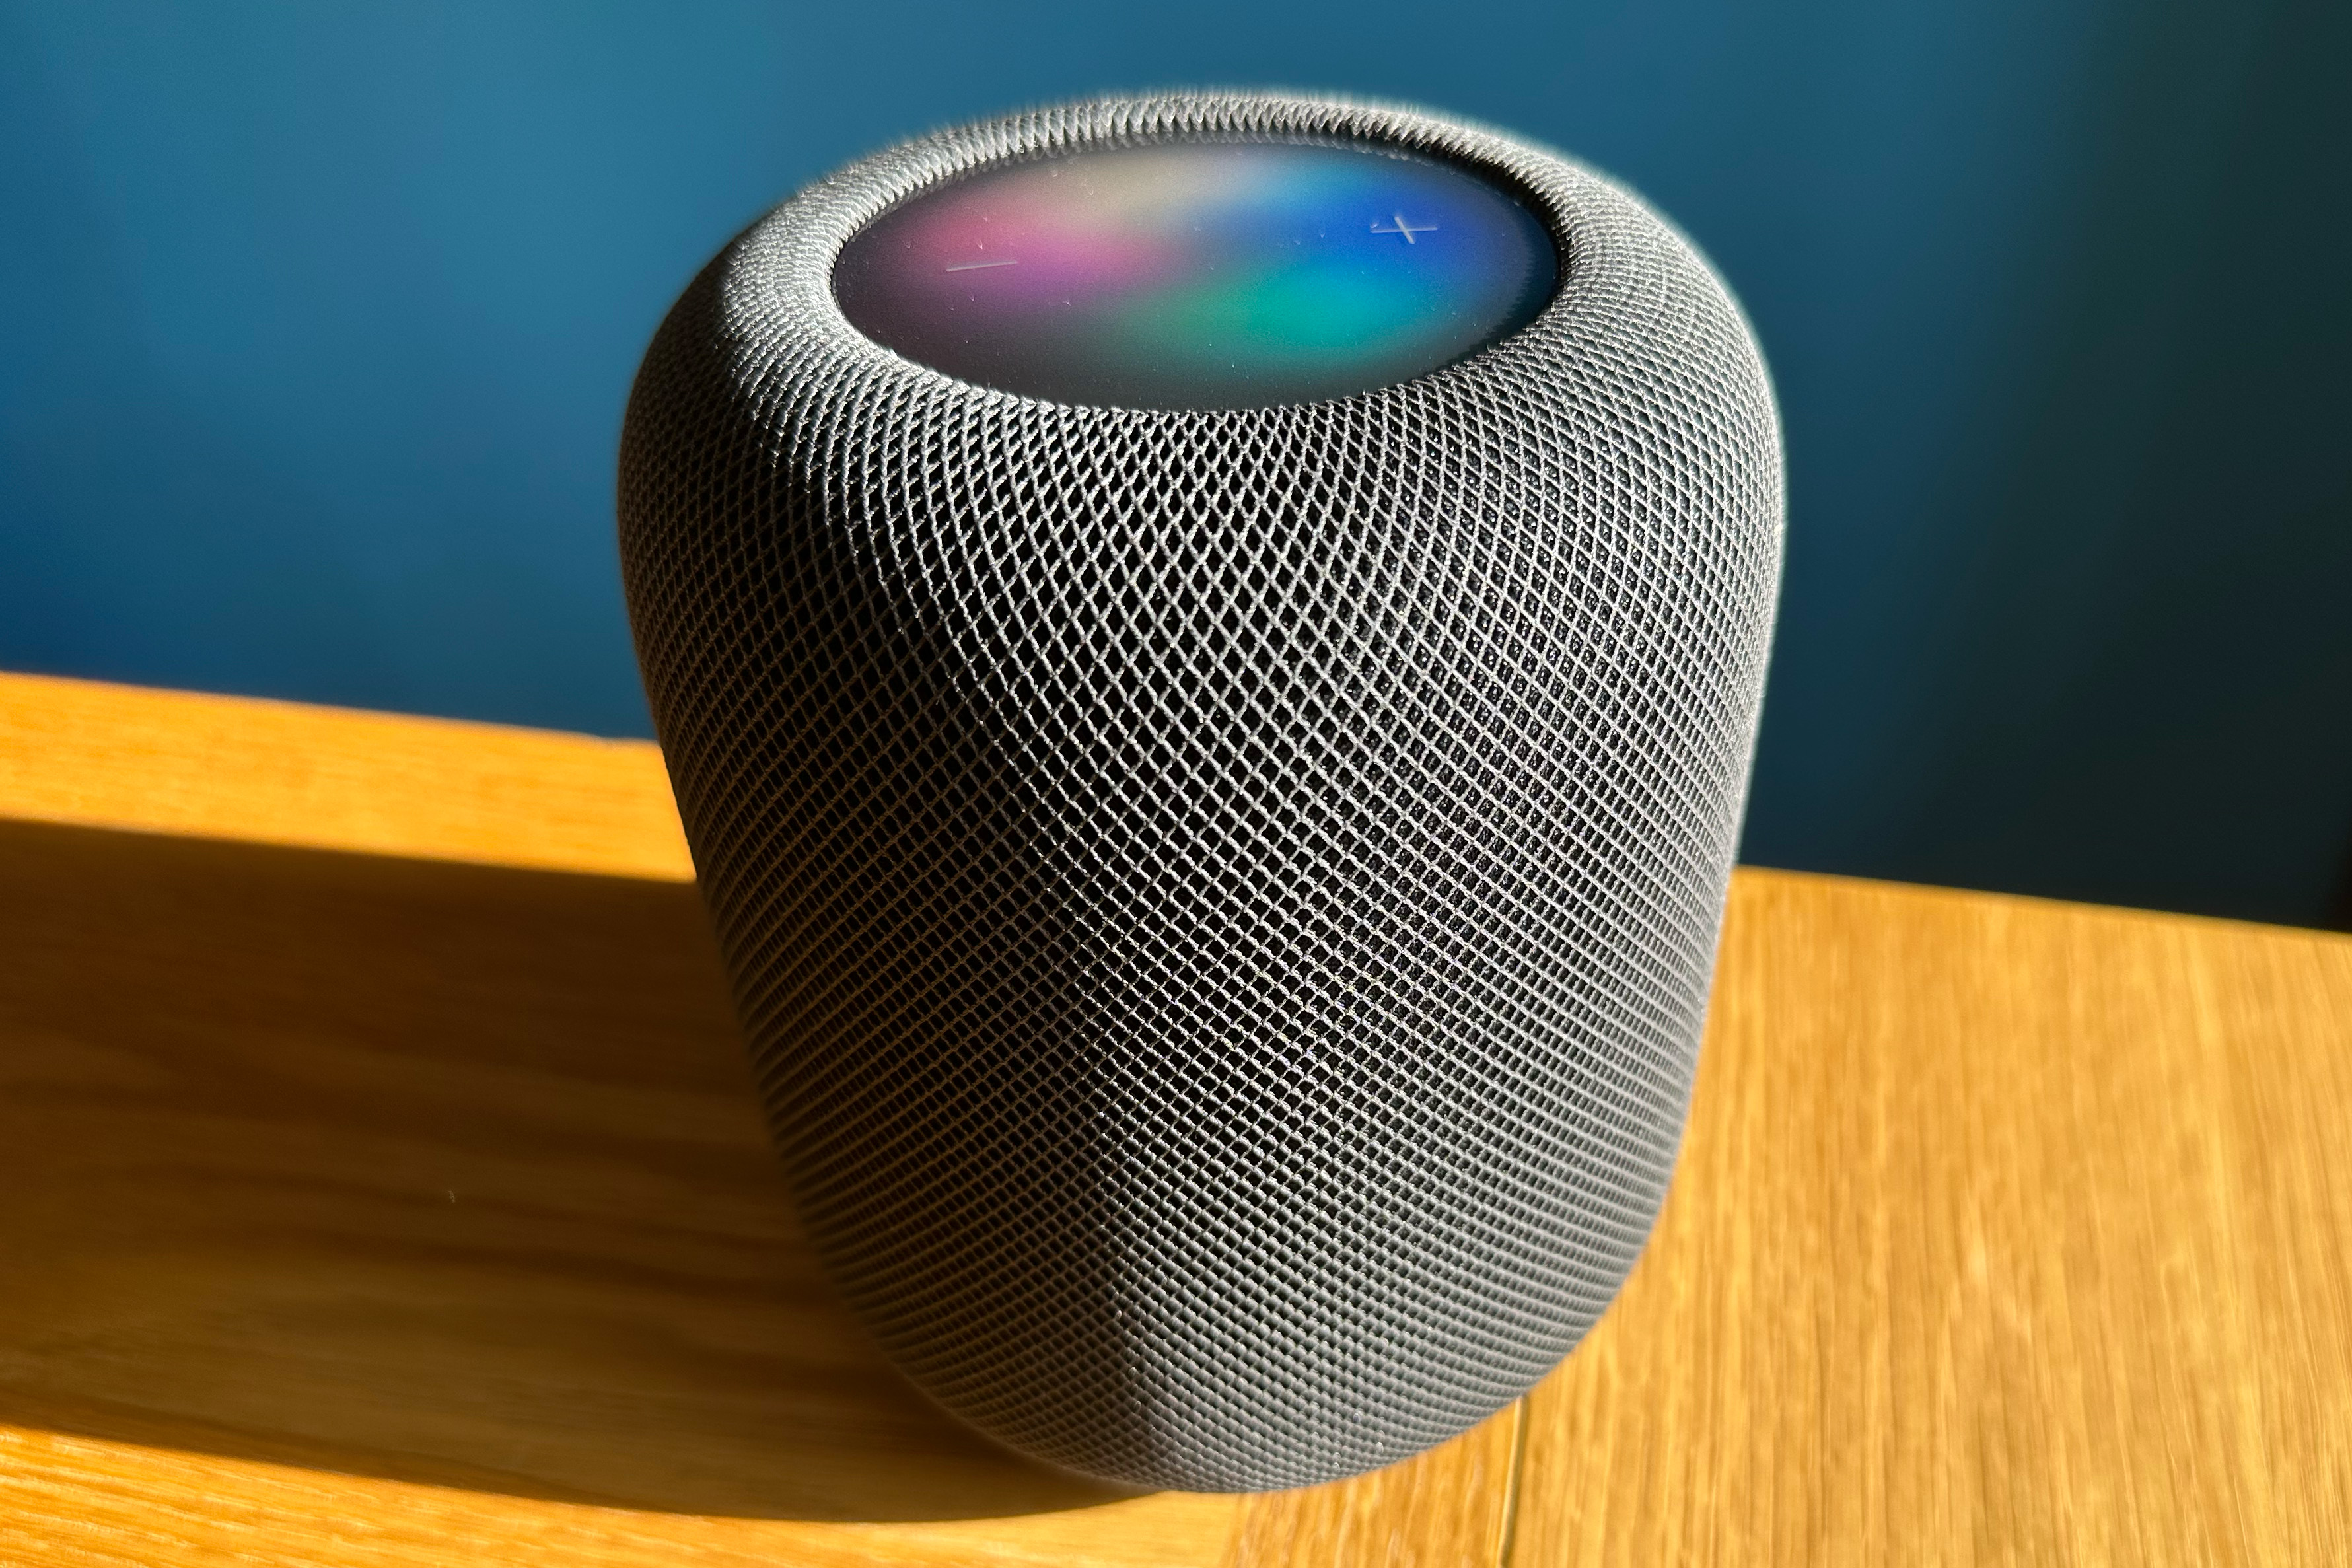 Apple HomePod 2: everything you need to know